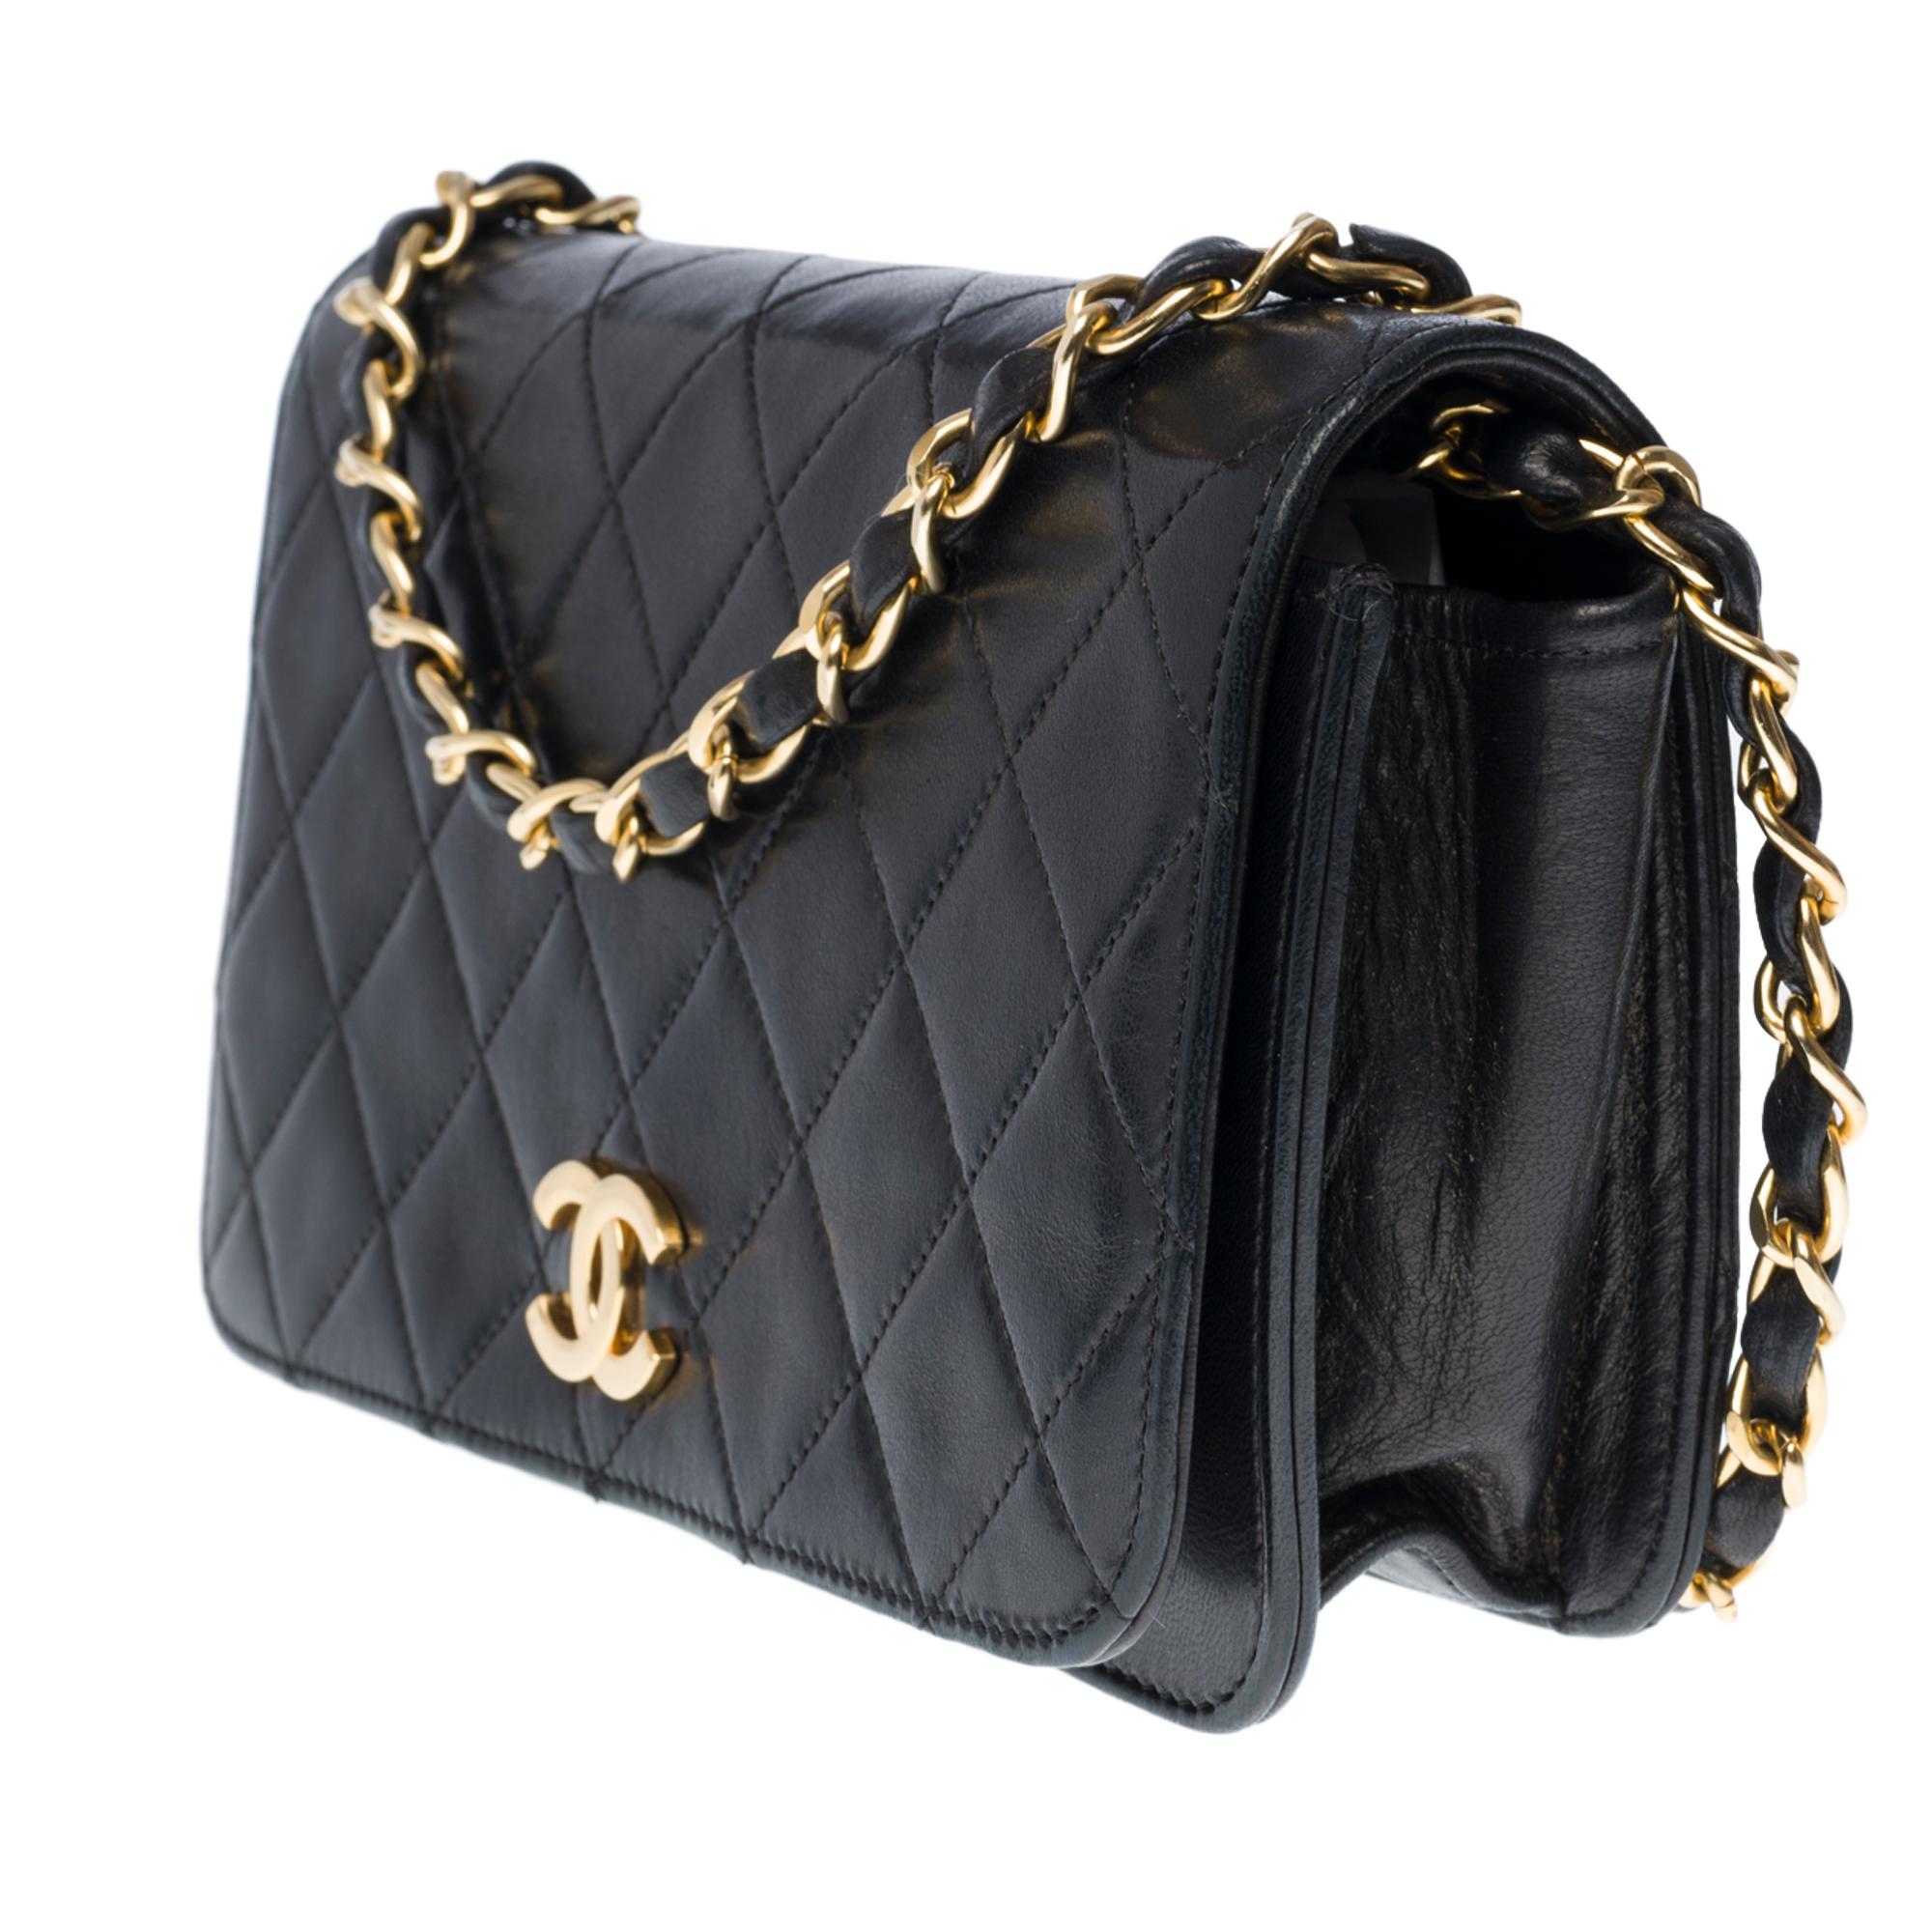 cost of a chanel purse